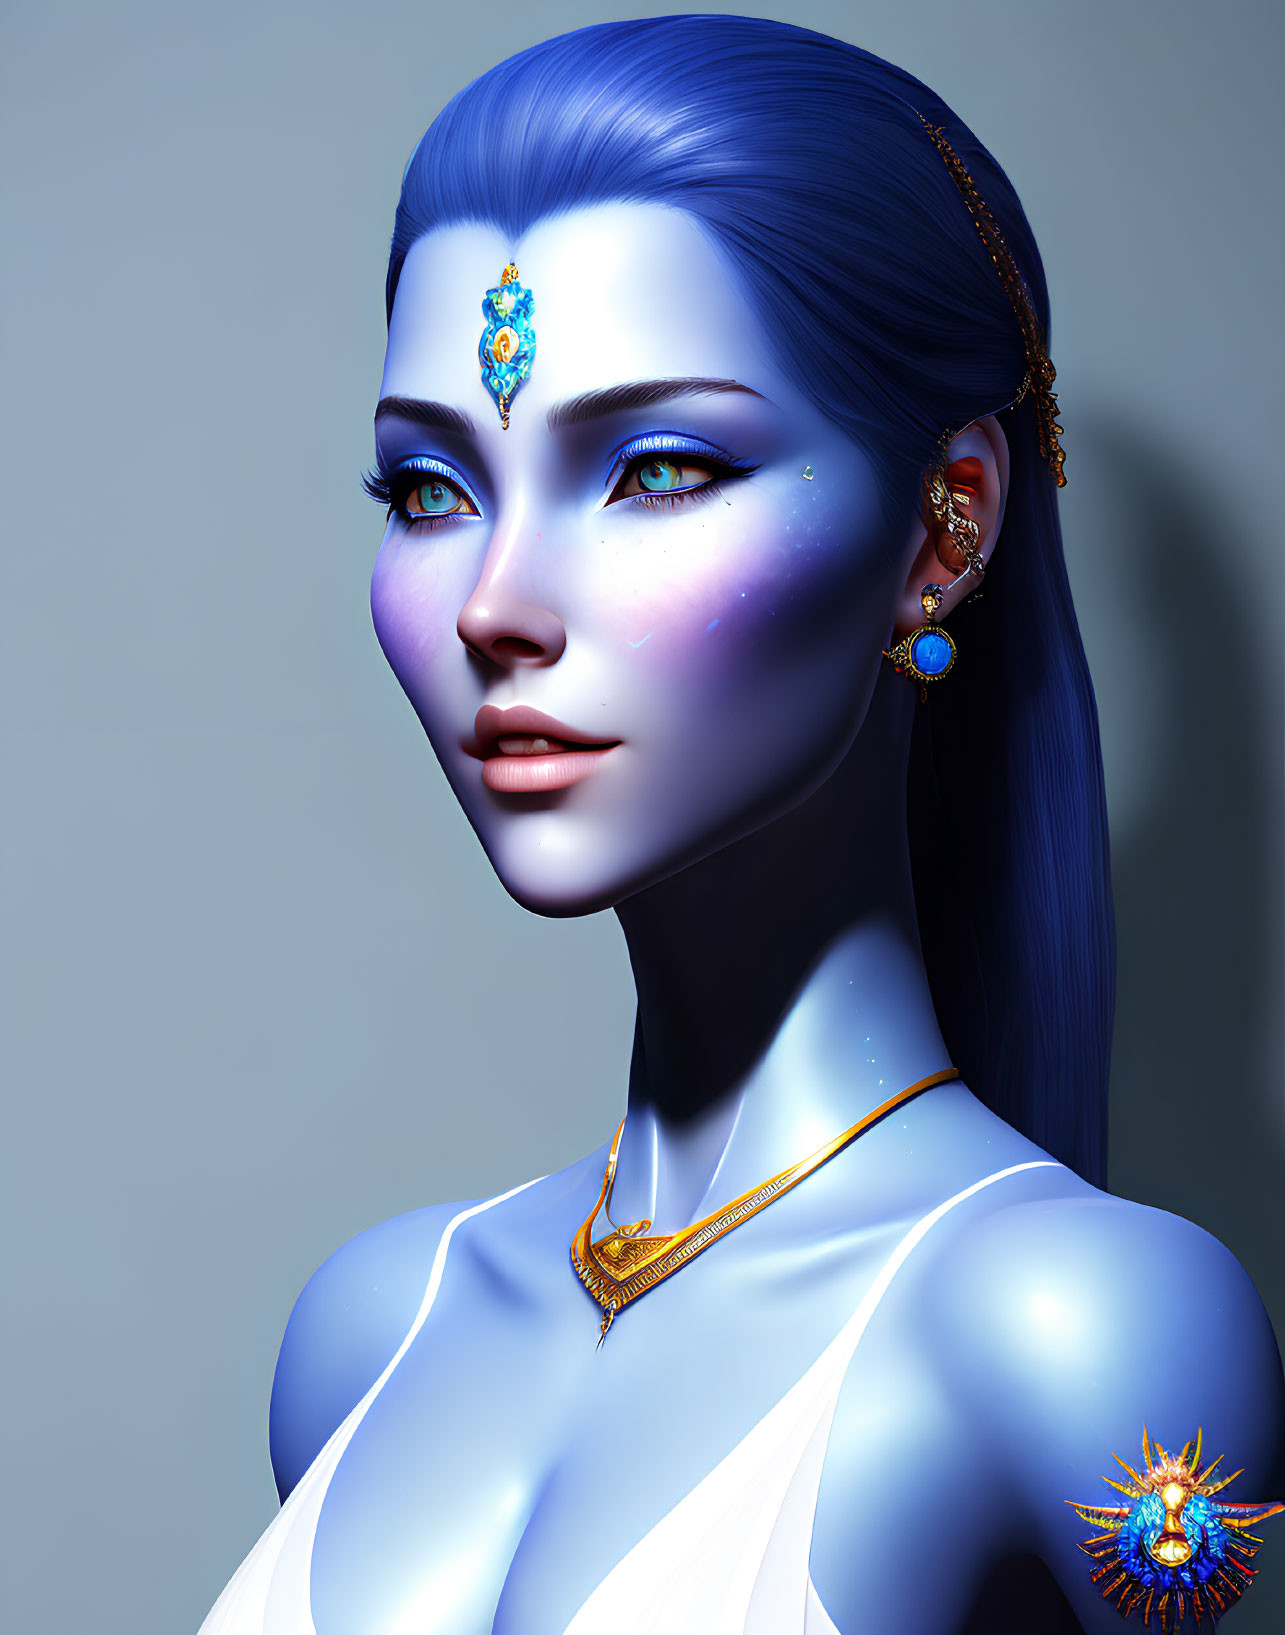 Blue-skinned woman with gold jewelry in 3D illustration